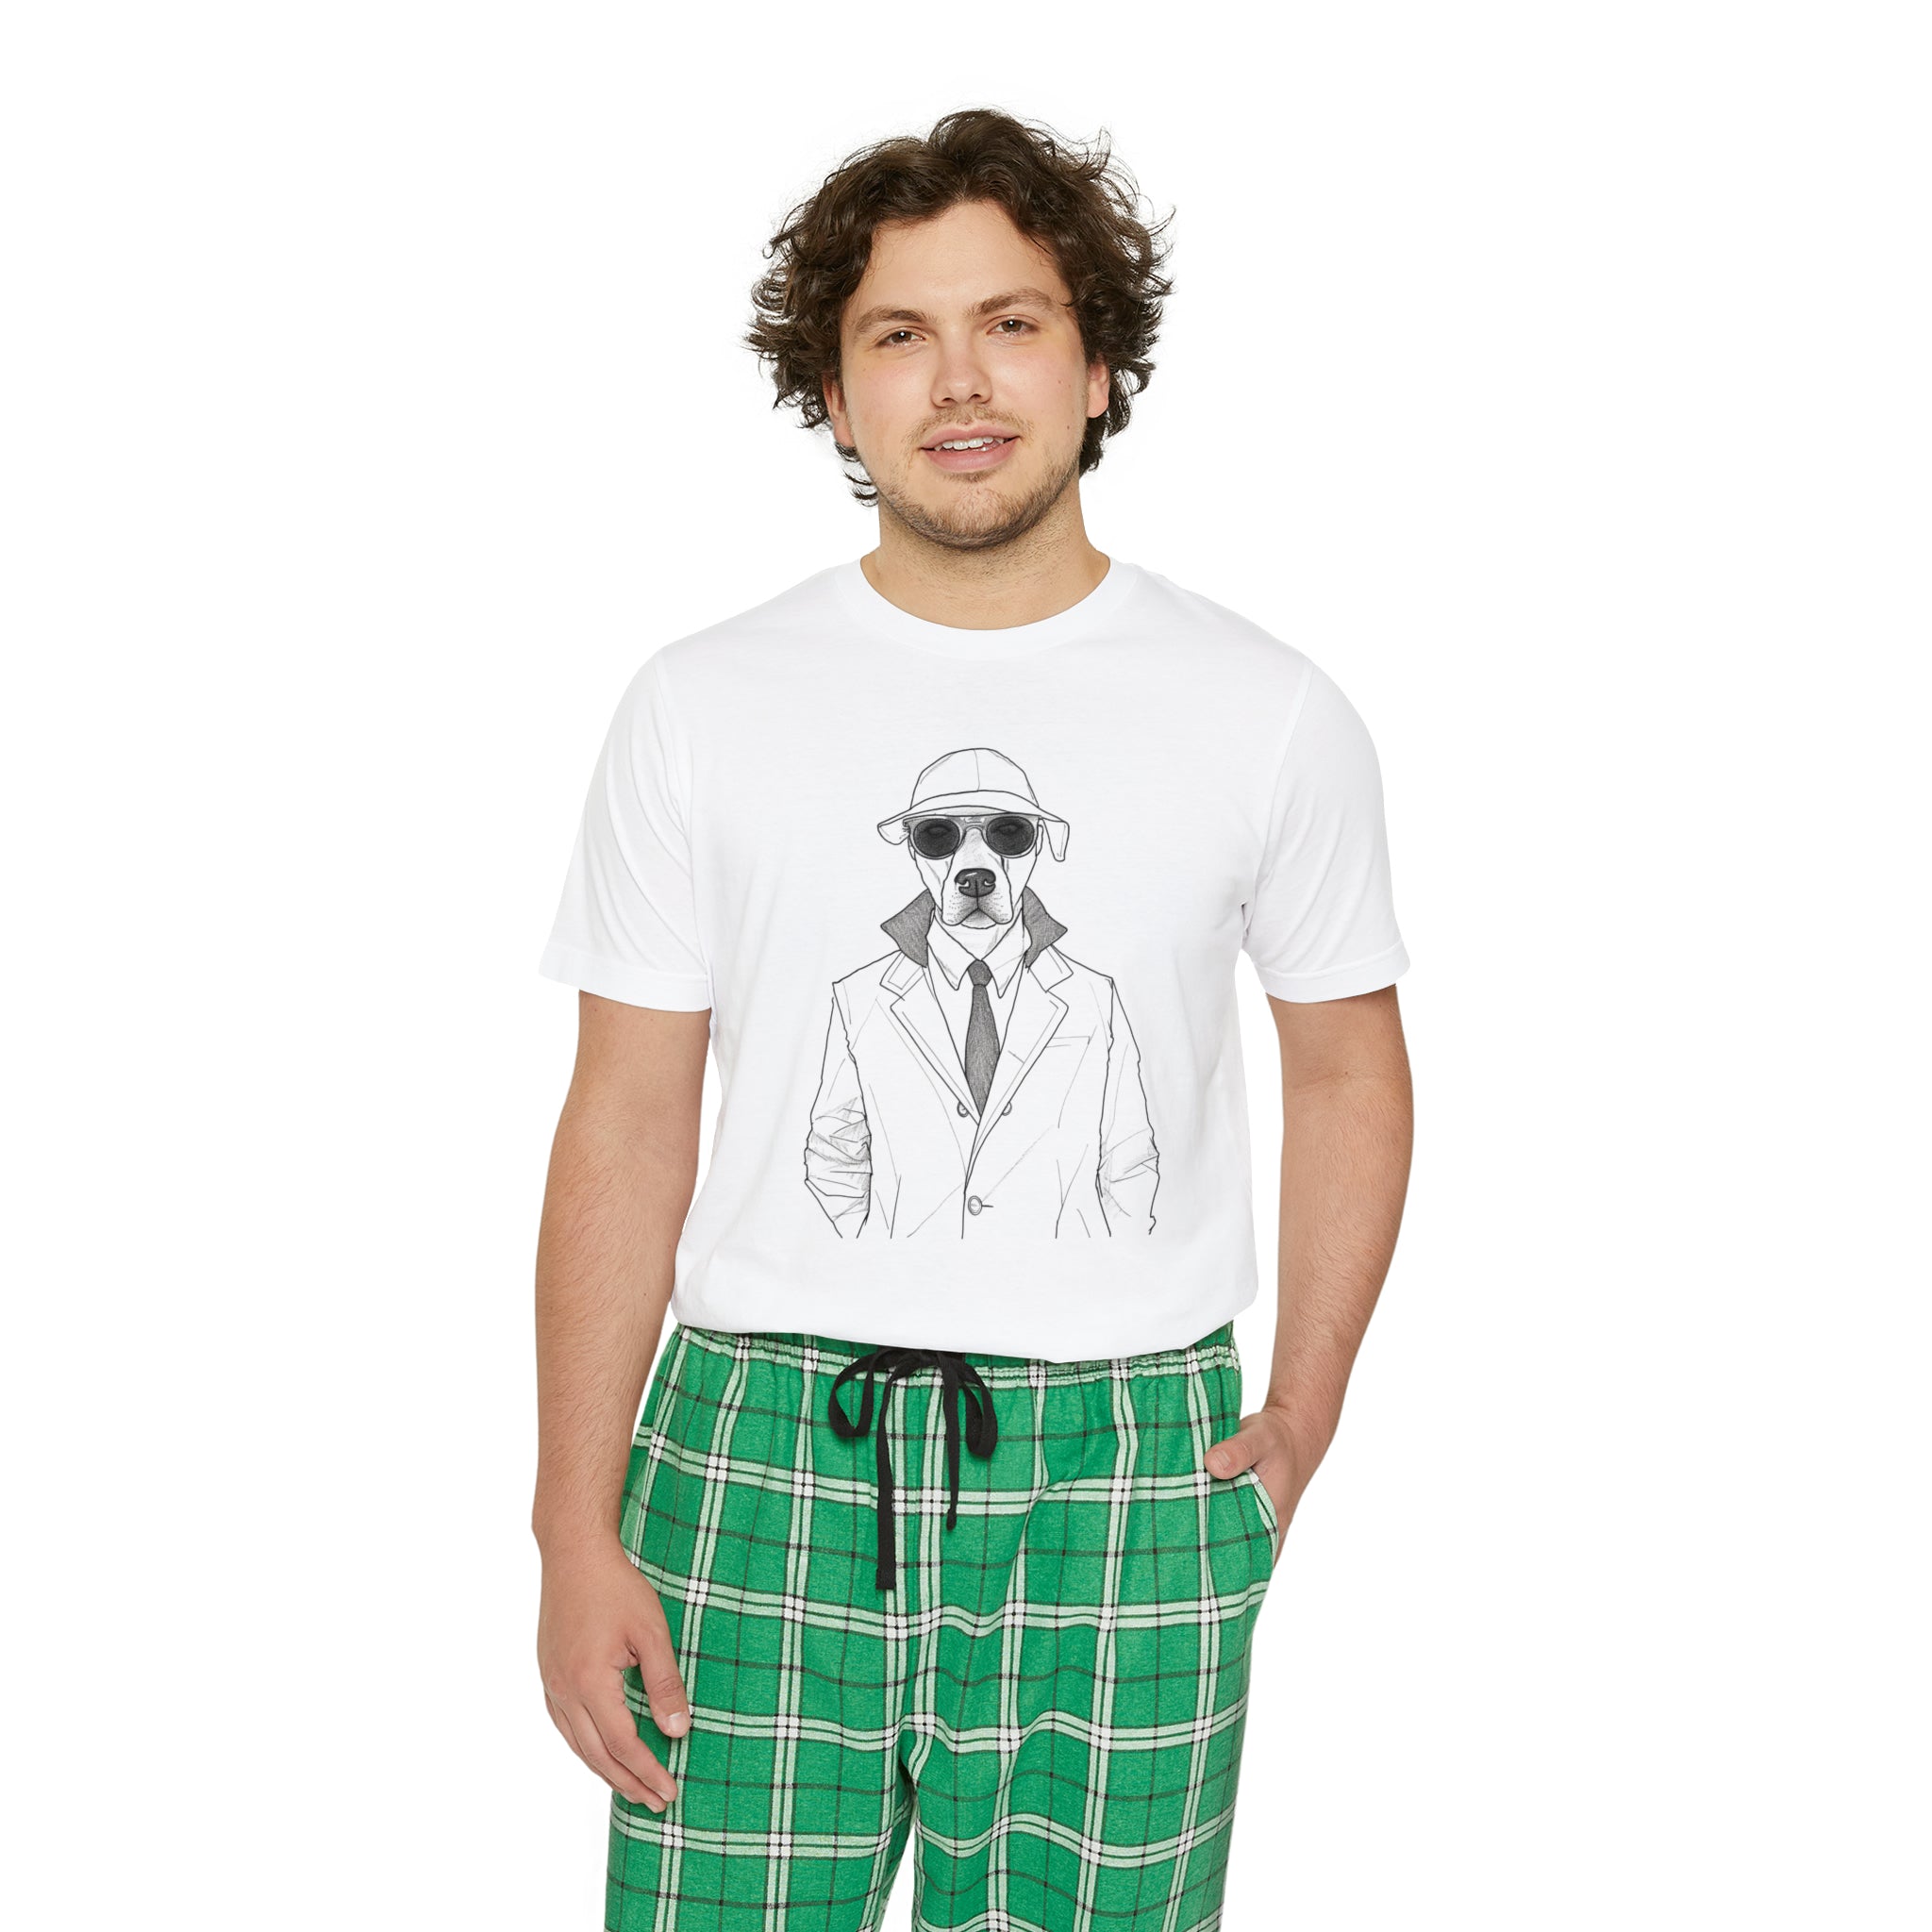 👕 Relax in Style: The set includes a soft, short-sleeved top and comfortable pajama bottoms, both adorned with the minimalist yet captivating Agent Dog sketch. This pajama set combines artistic style with ultimate comfort, ideal for unwinding after a long day or enjoying a lazy weekend morning.